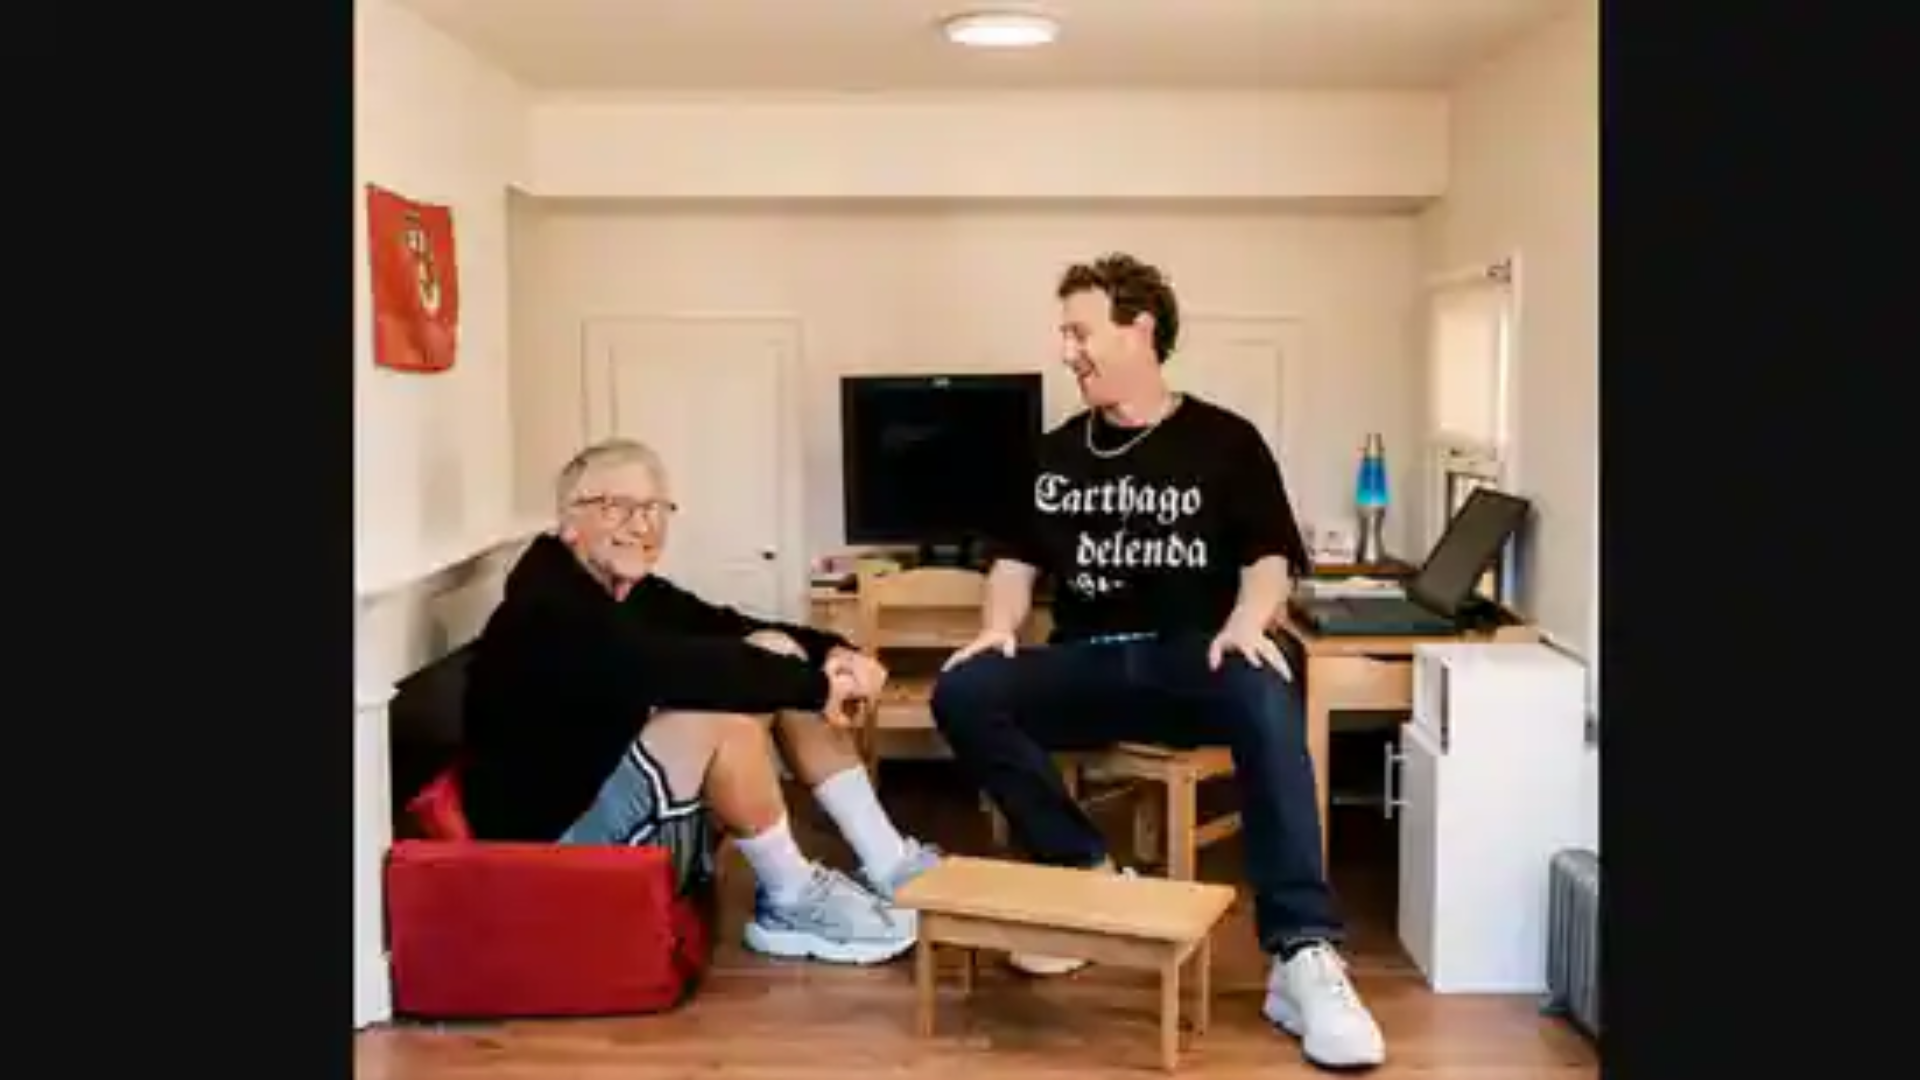 Mark Zuckerberg Shares Pictures From His 40th Birthday Celebration With Bill Gates As Special Guest